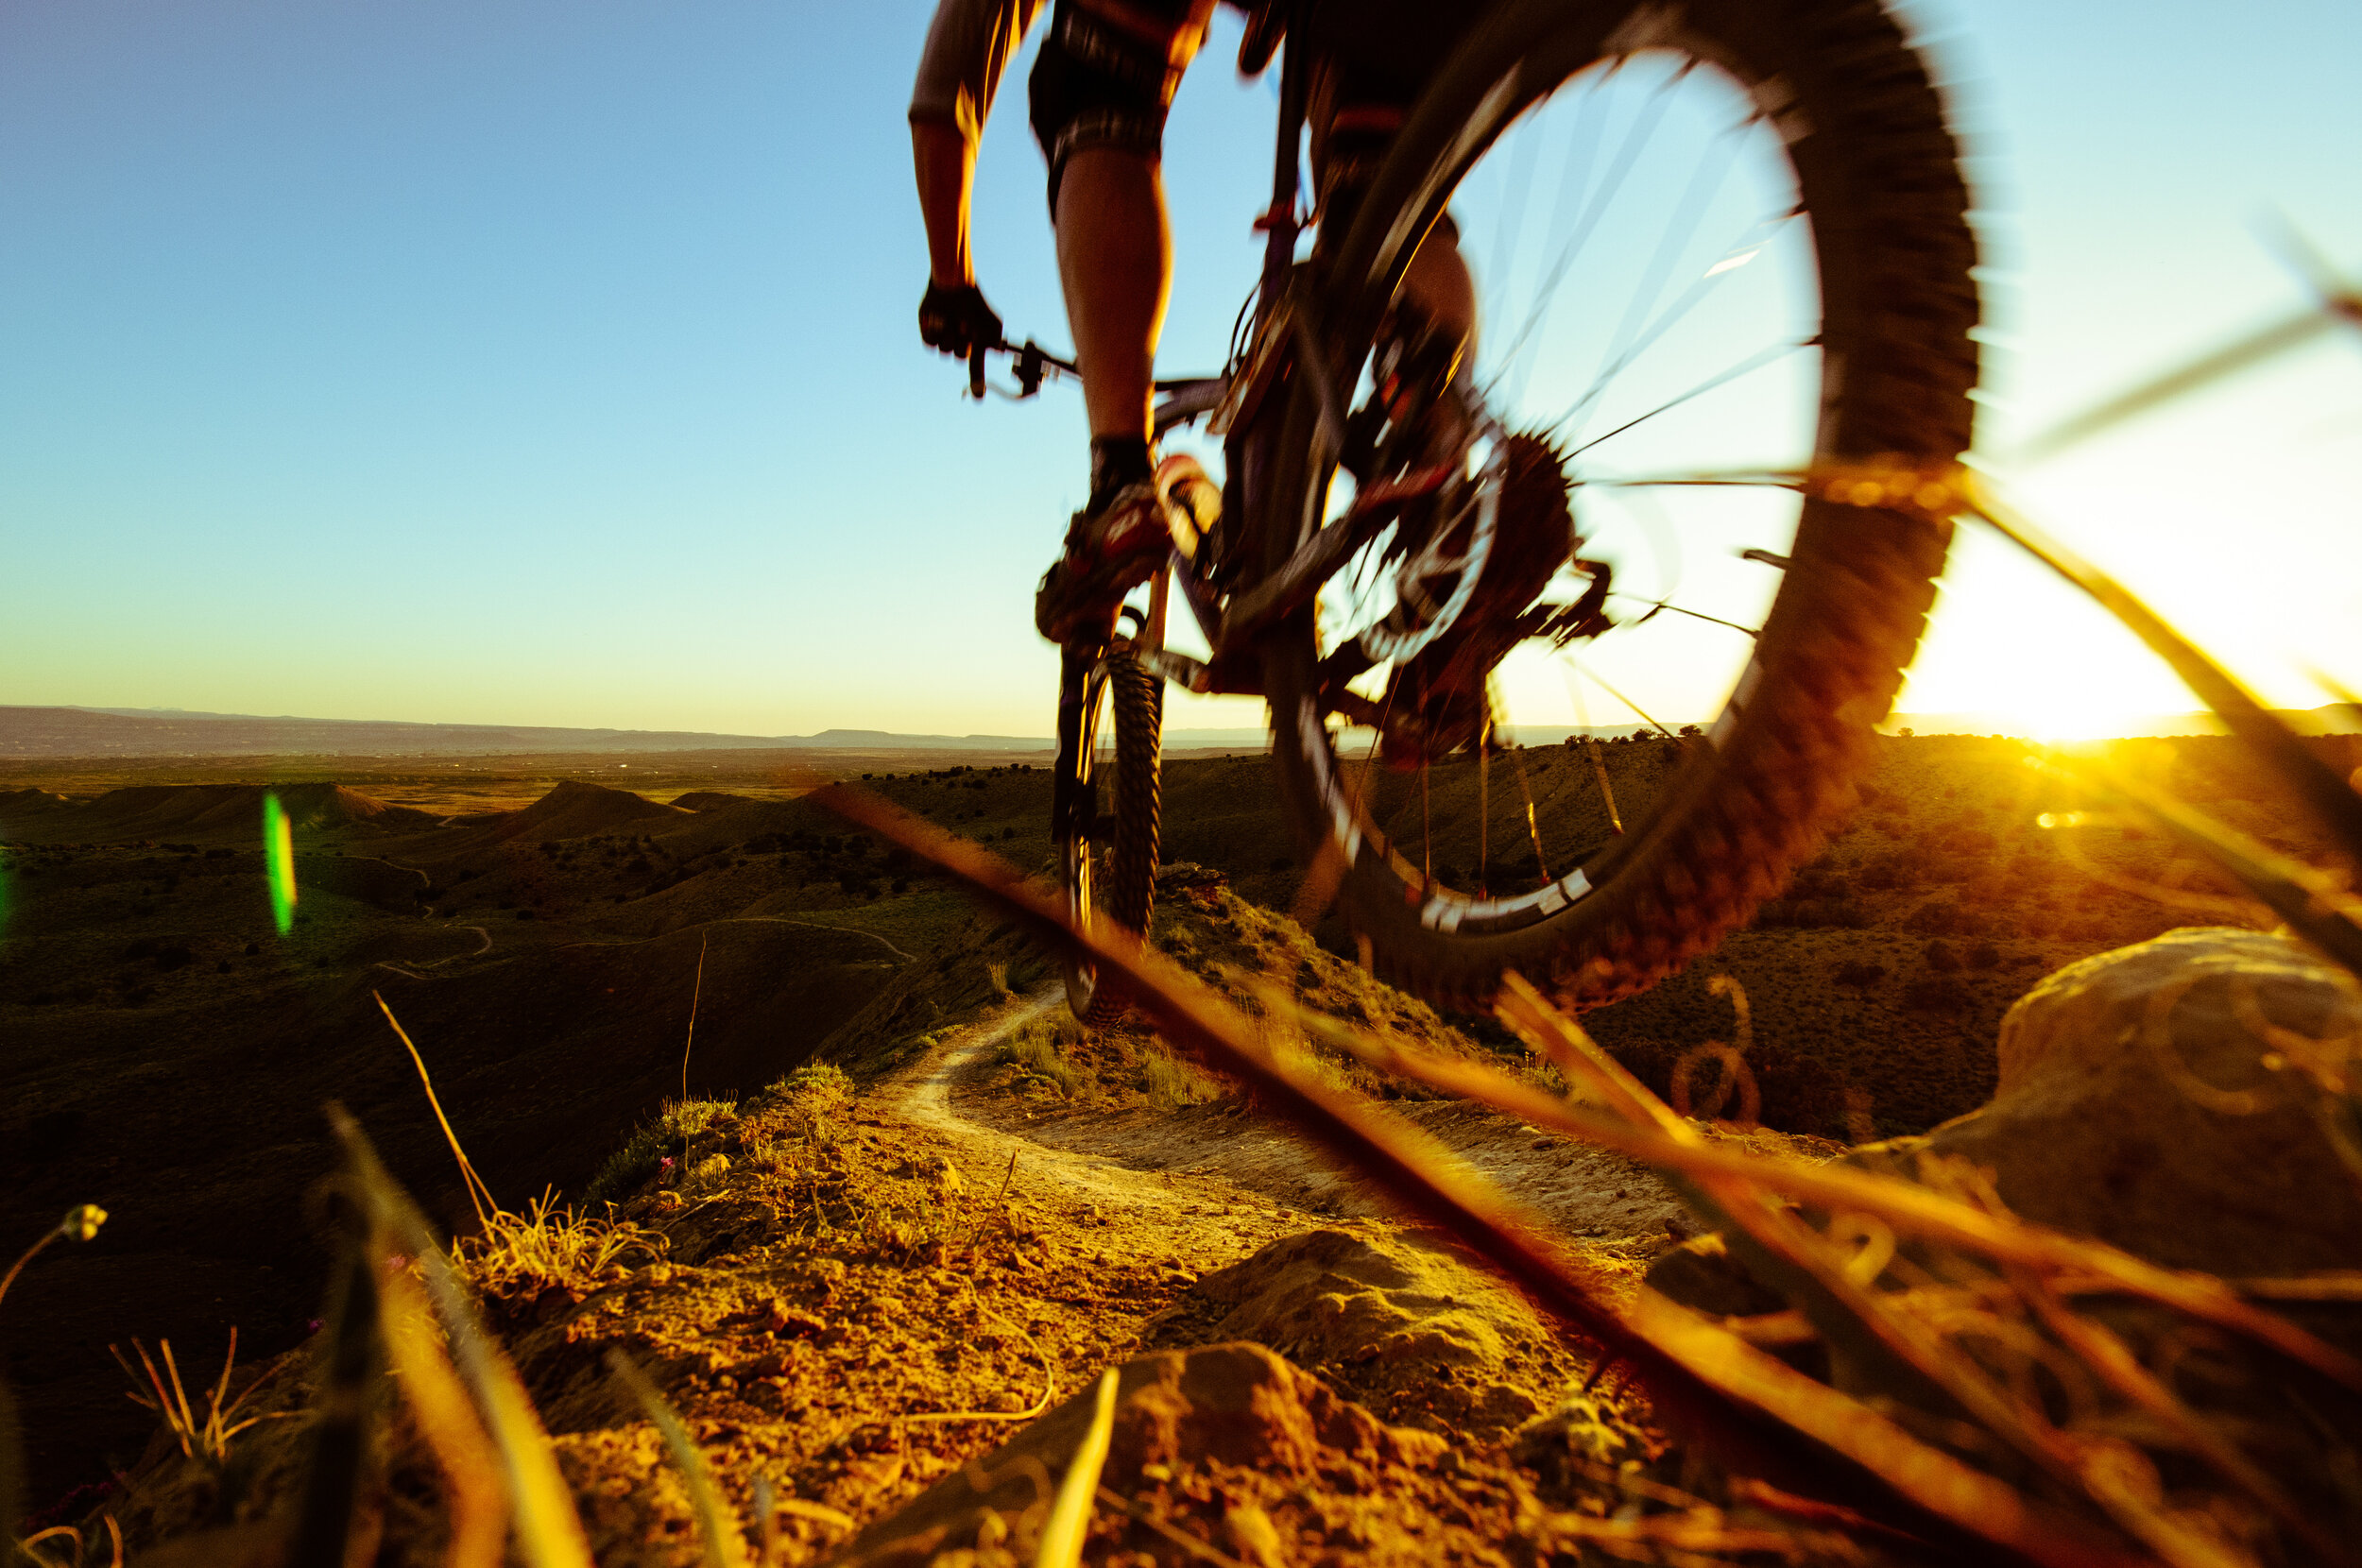 How To Spend 57 Hours in Fruita, Colorado As A Mountain Biker